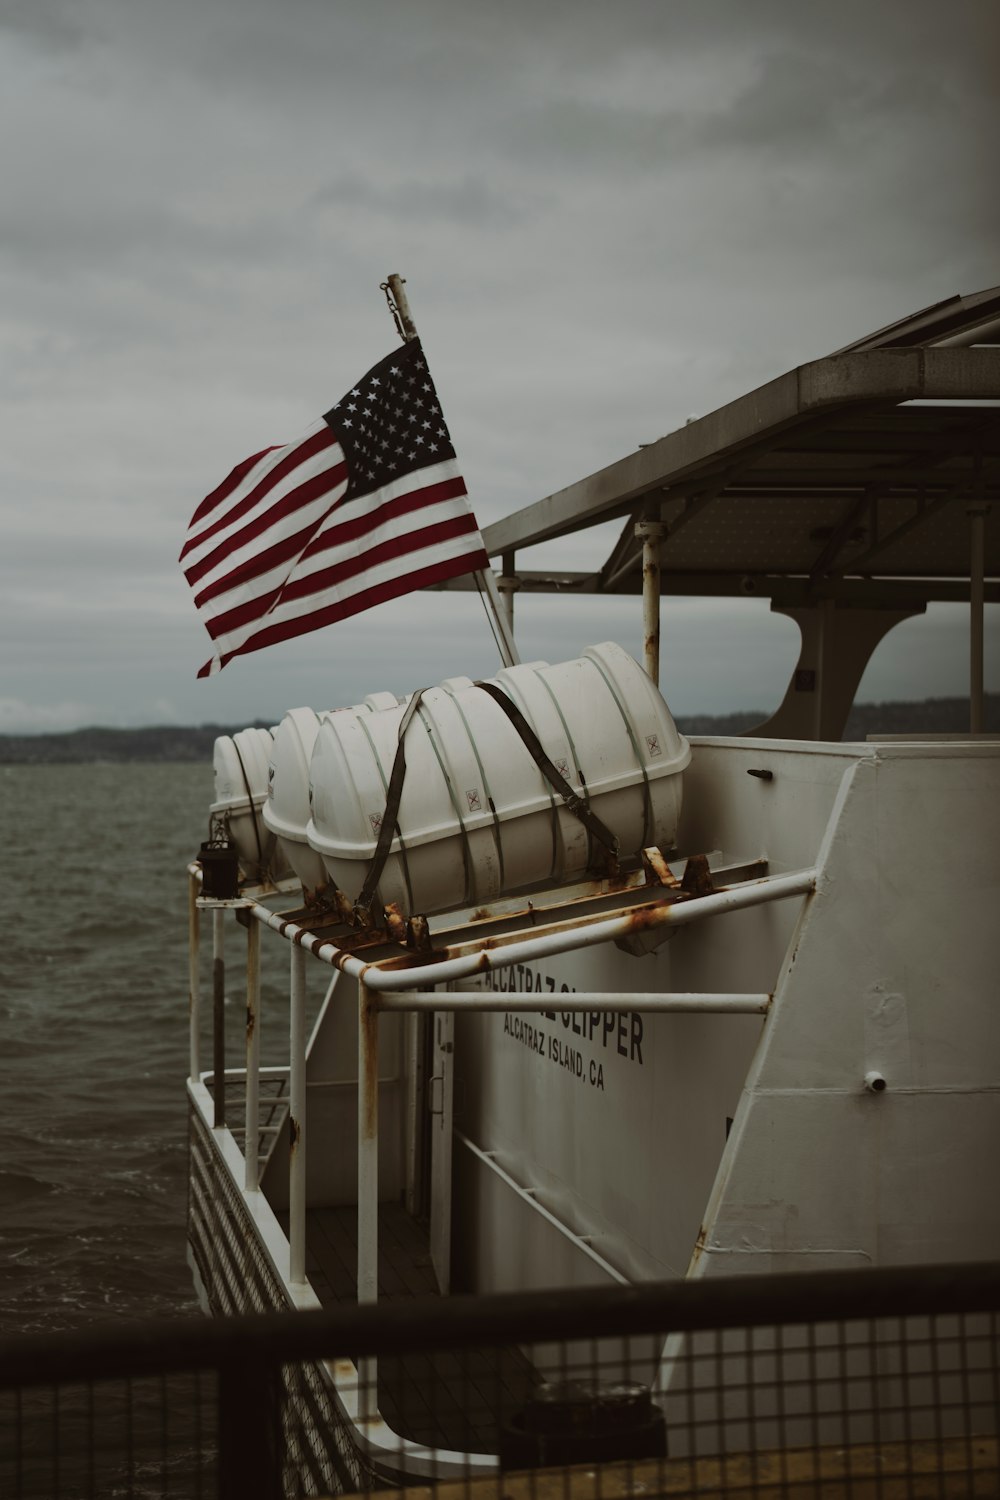 an american flag on a boat in the water